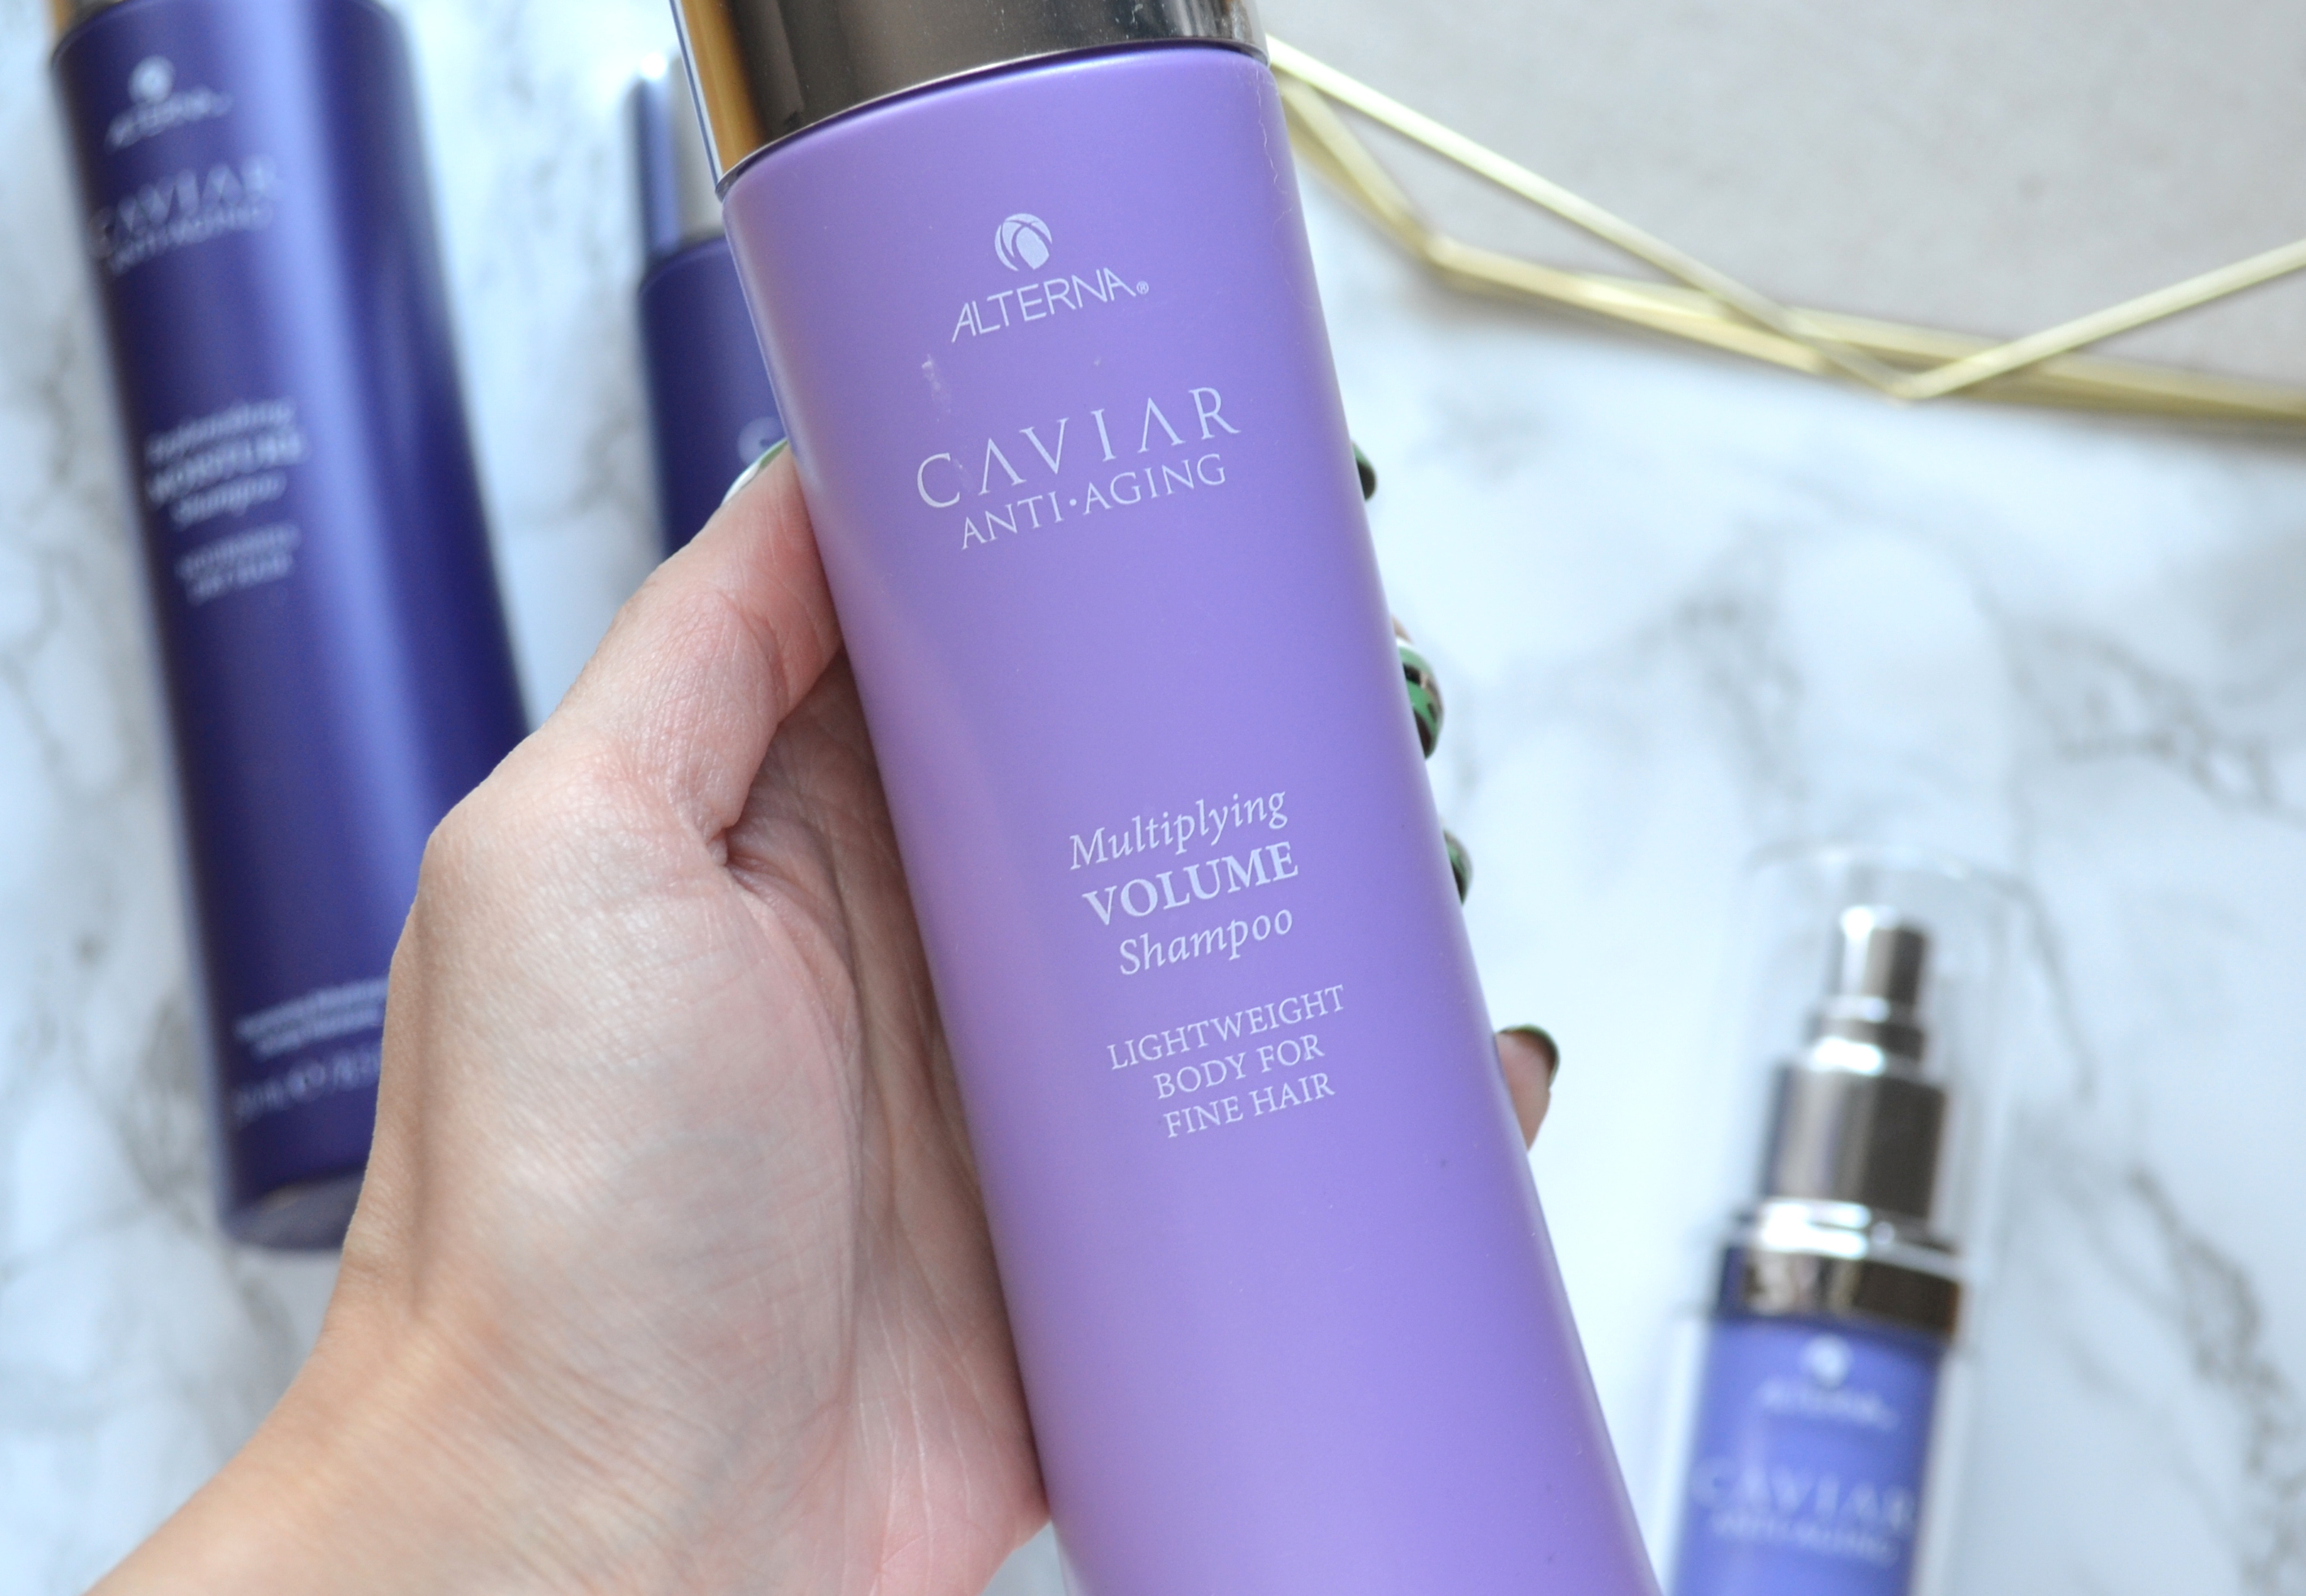 HAIR | Caviar Anti-Aging Collection | Cosmetic | Vancouver beauty, nail art and lifestyle blog